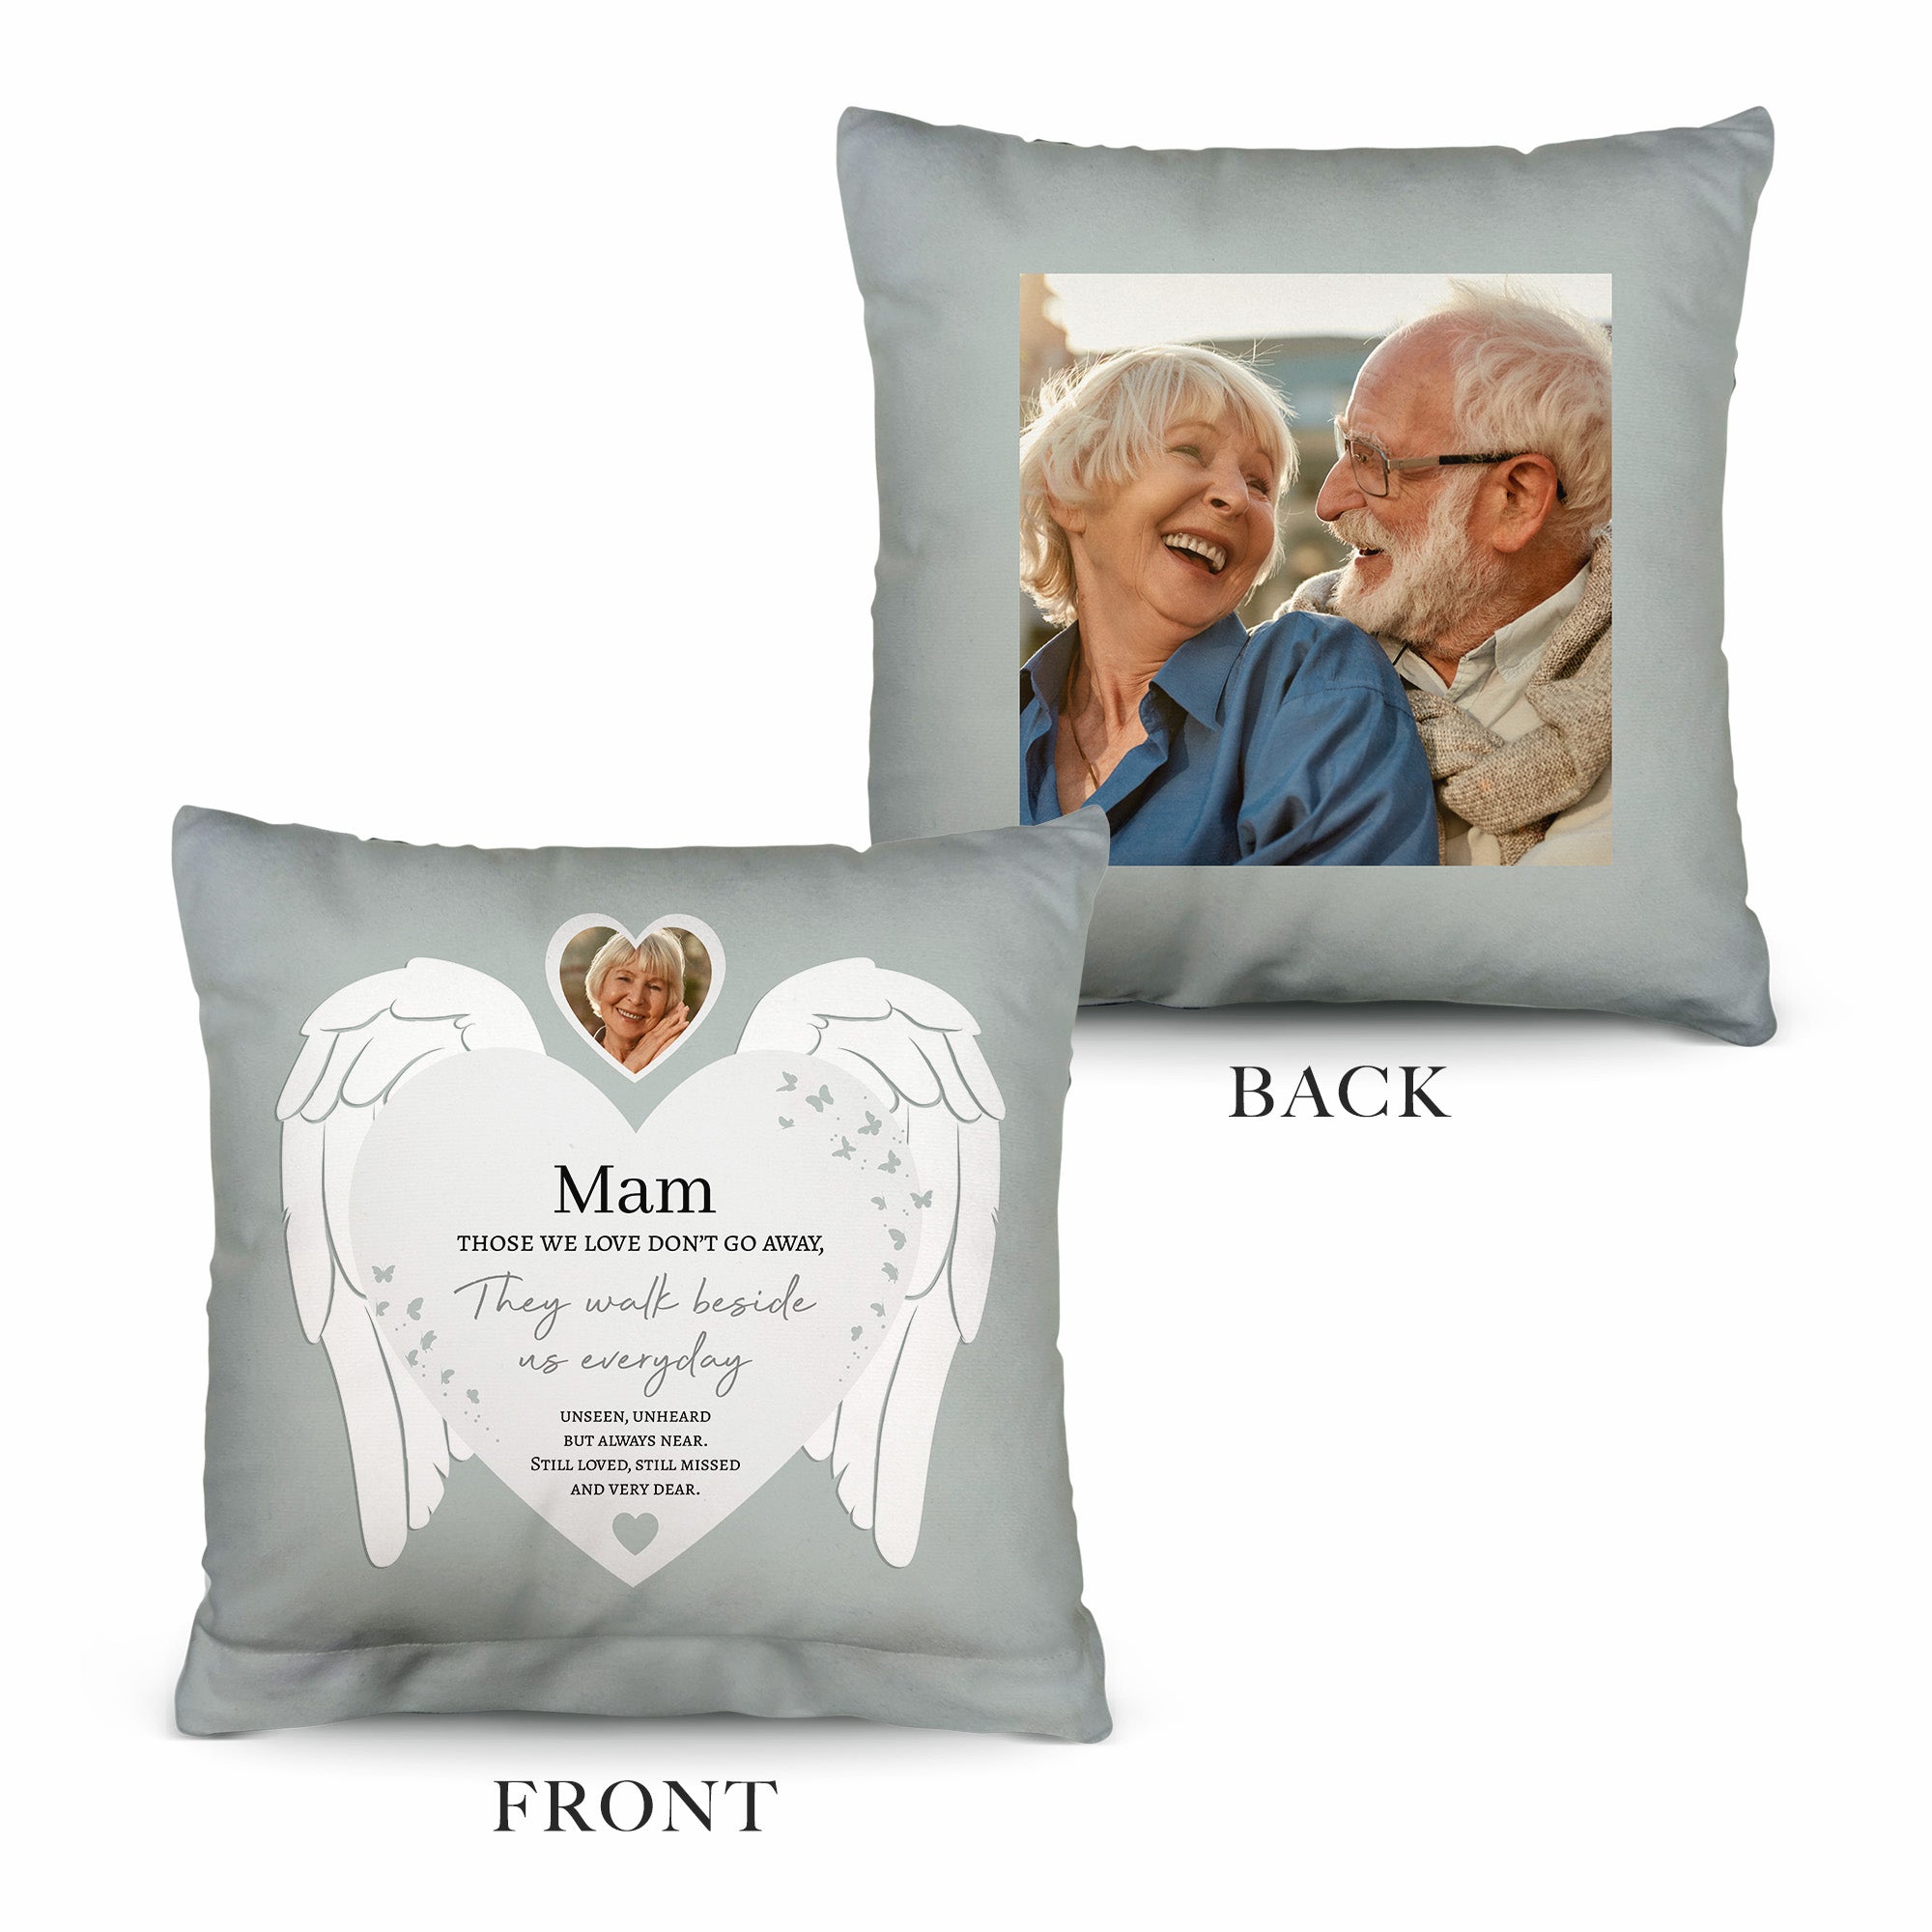 Those we love don’t go away - Personalised Memory Cushion - Two Sizes